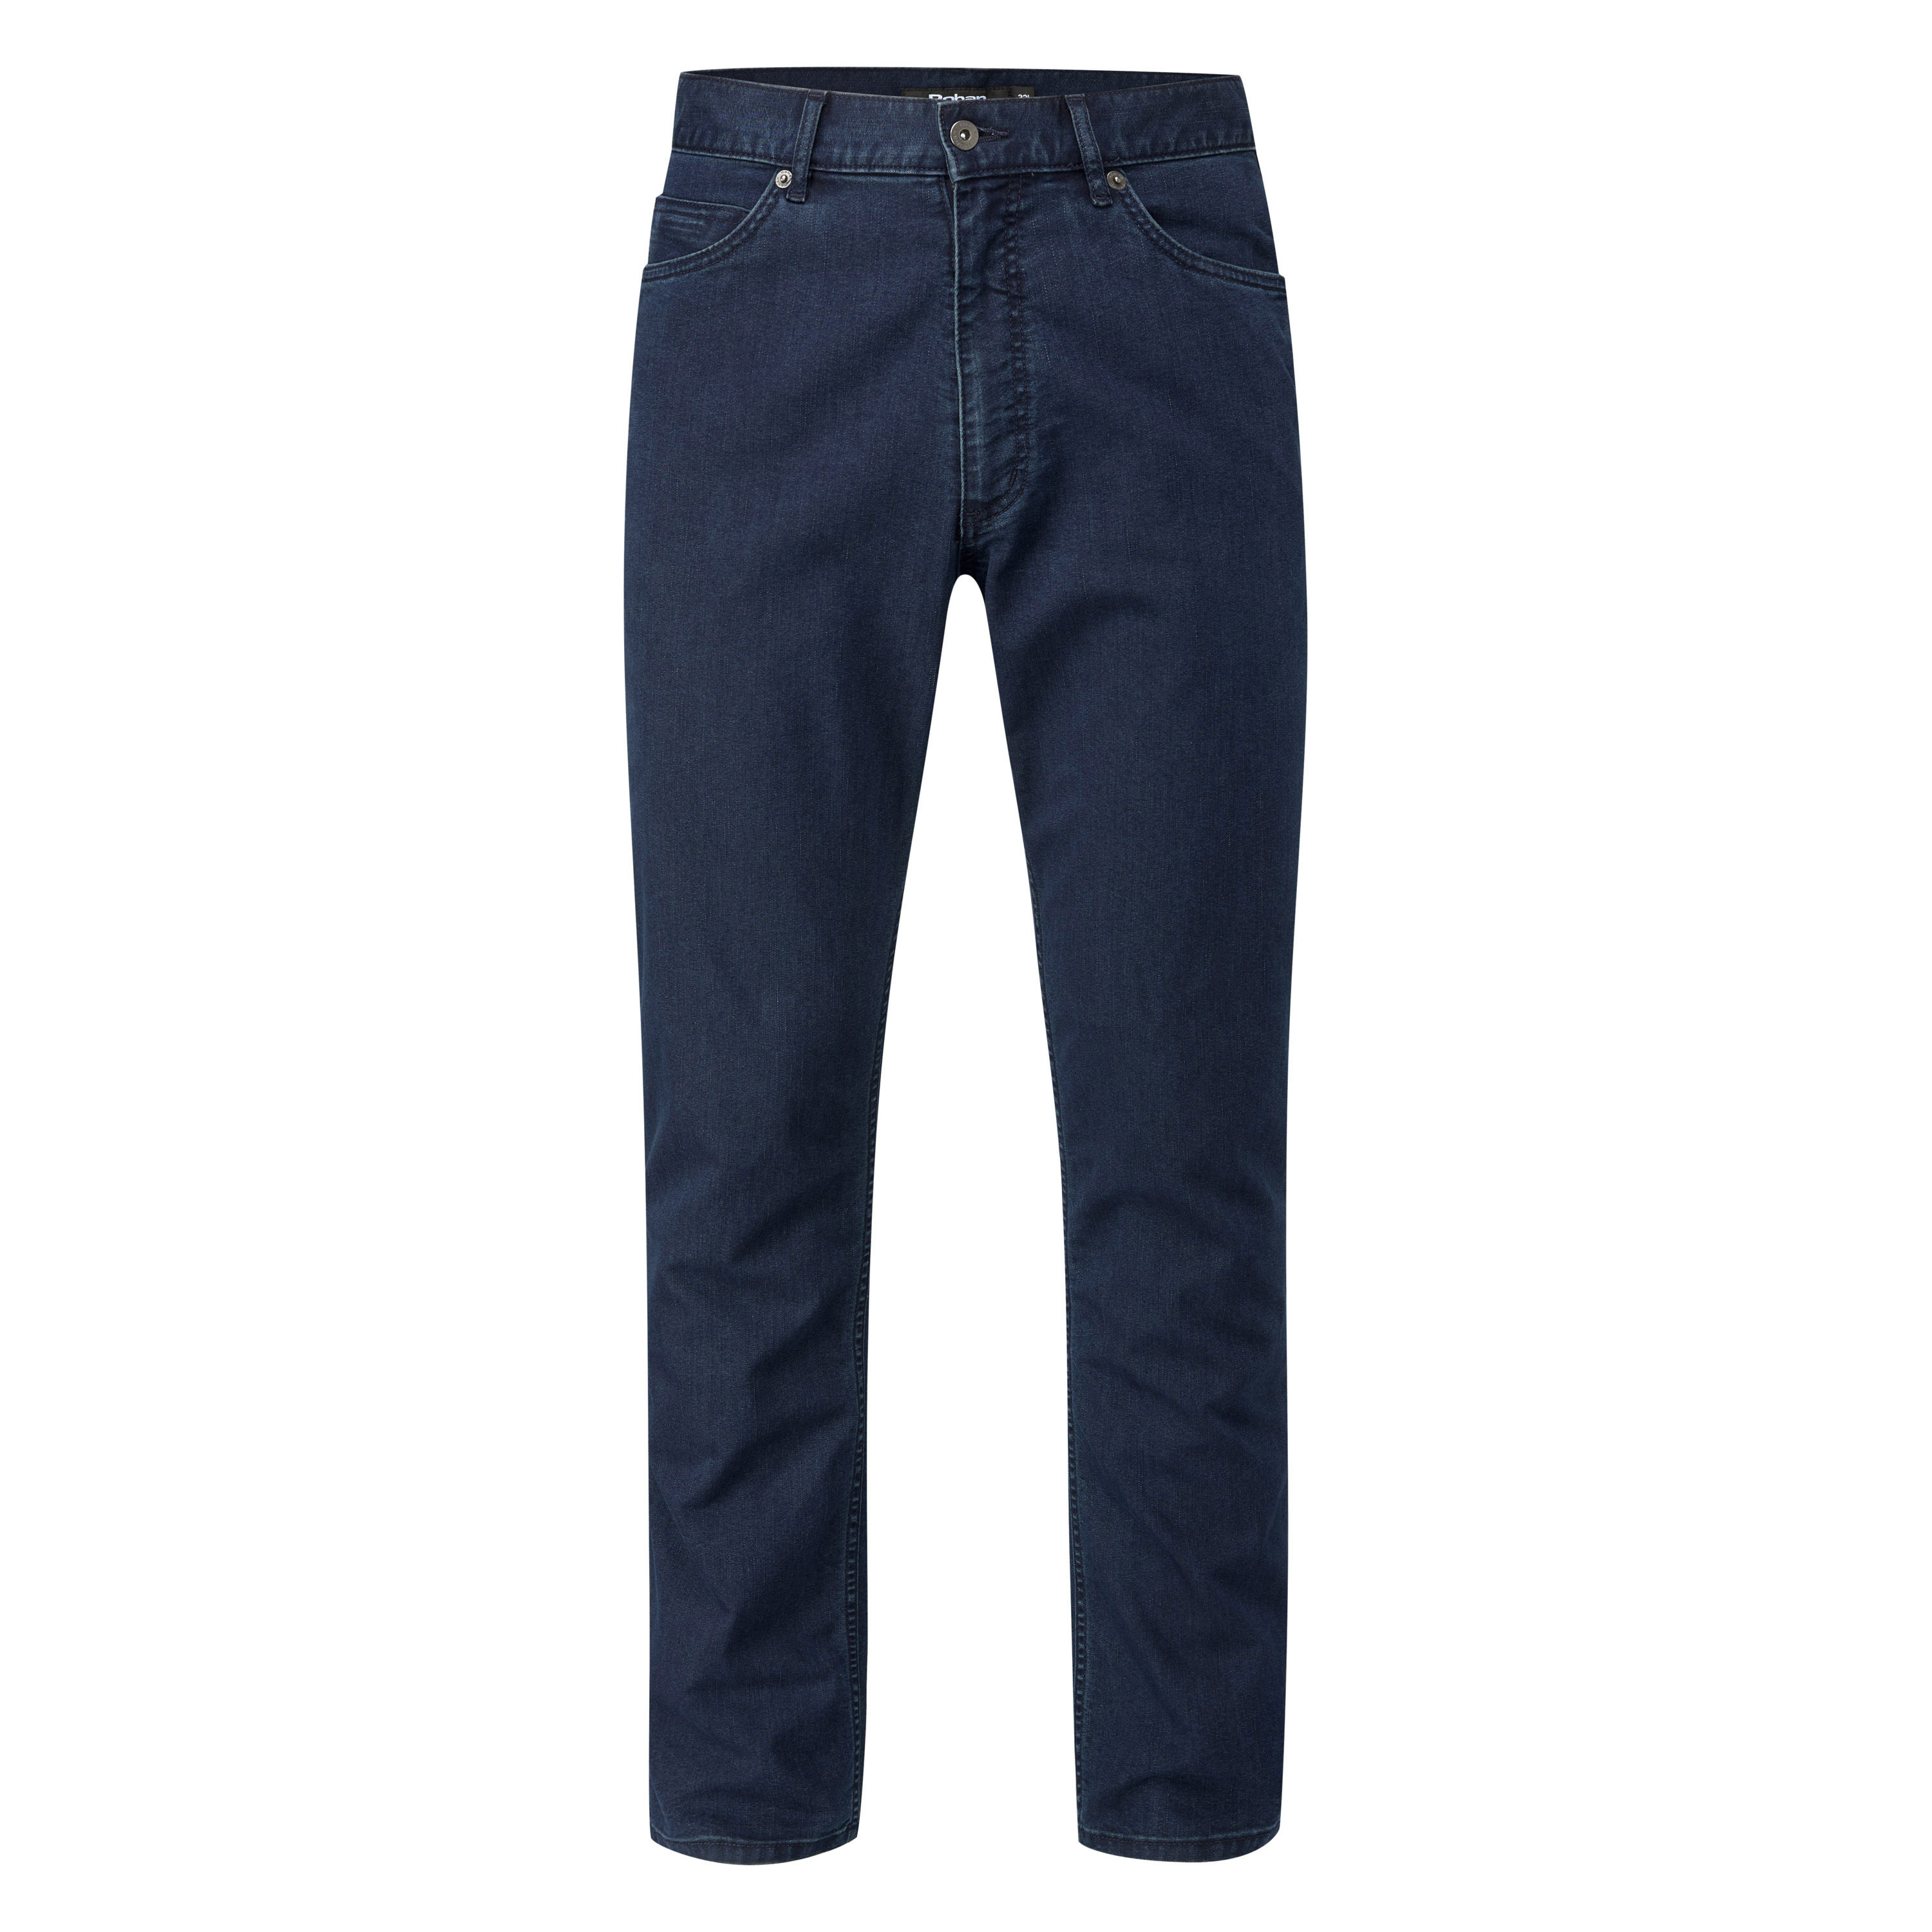 Men's Jeans Classic - Perfectly normal 